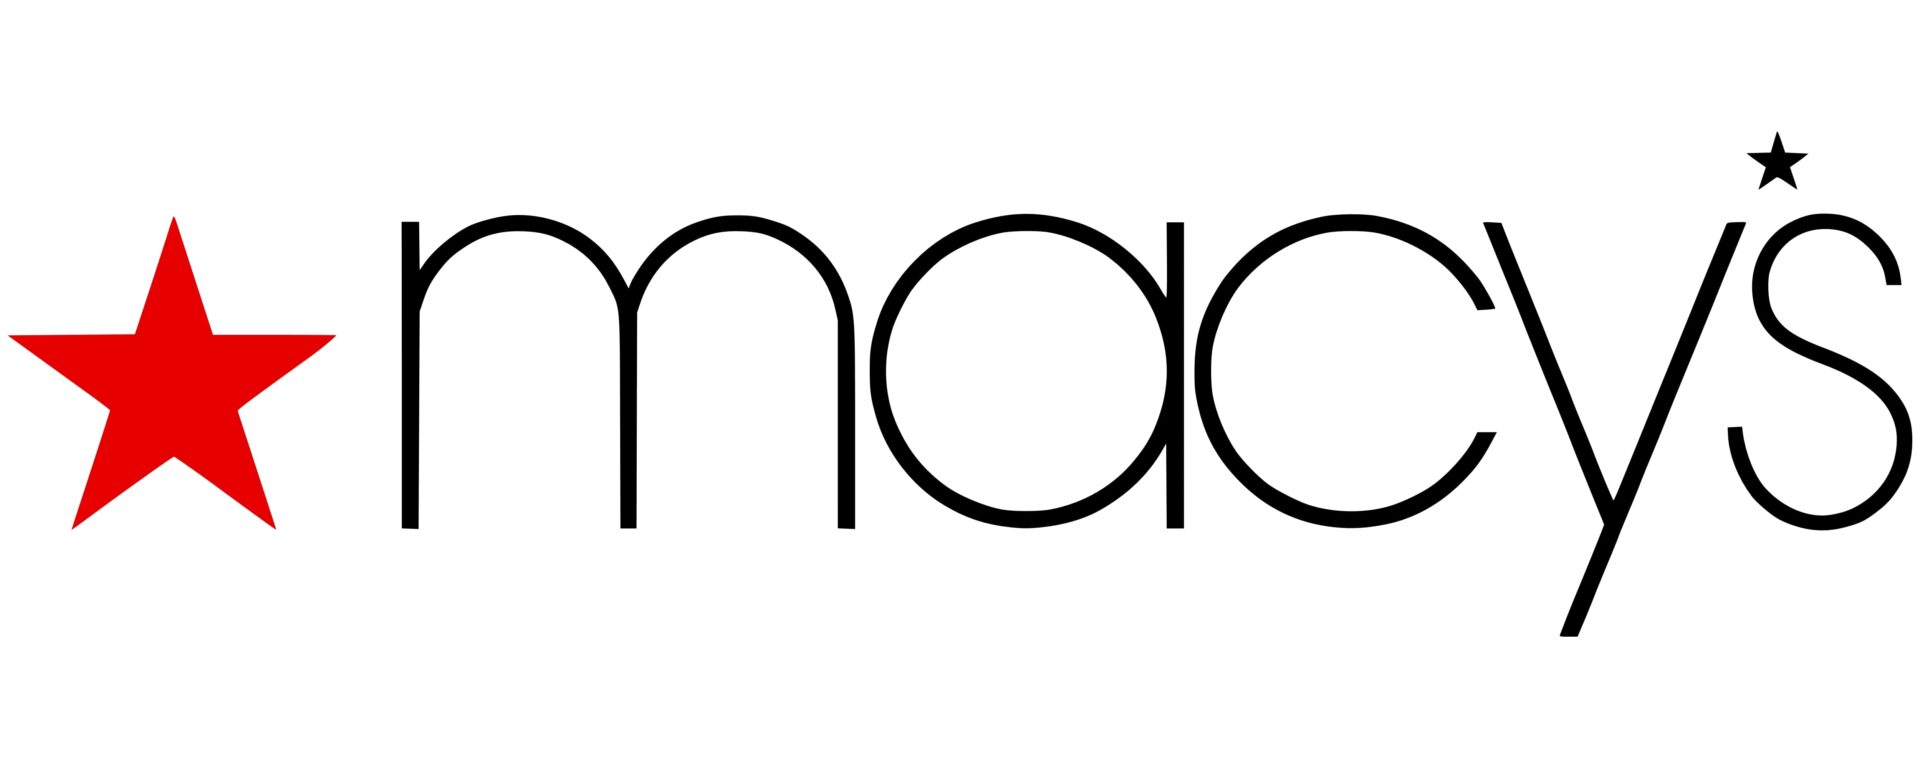 A black and white image of the macy 's logo.